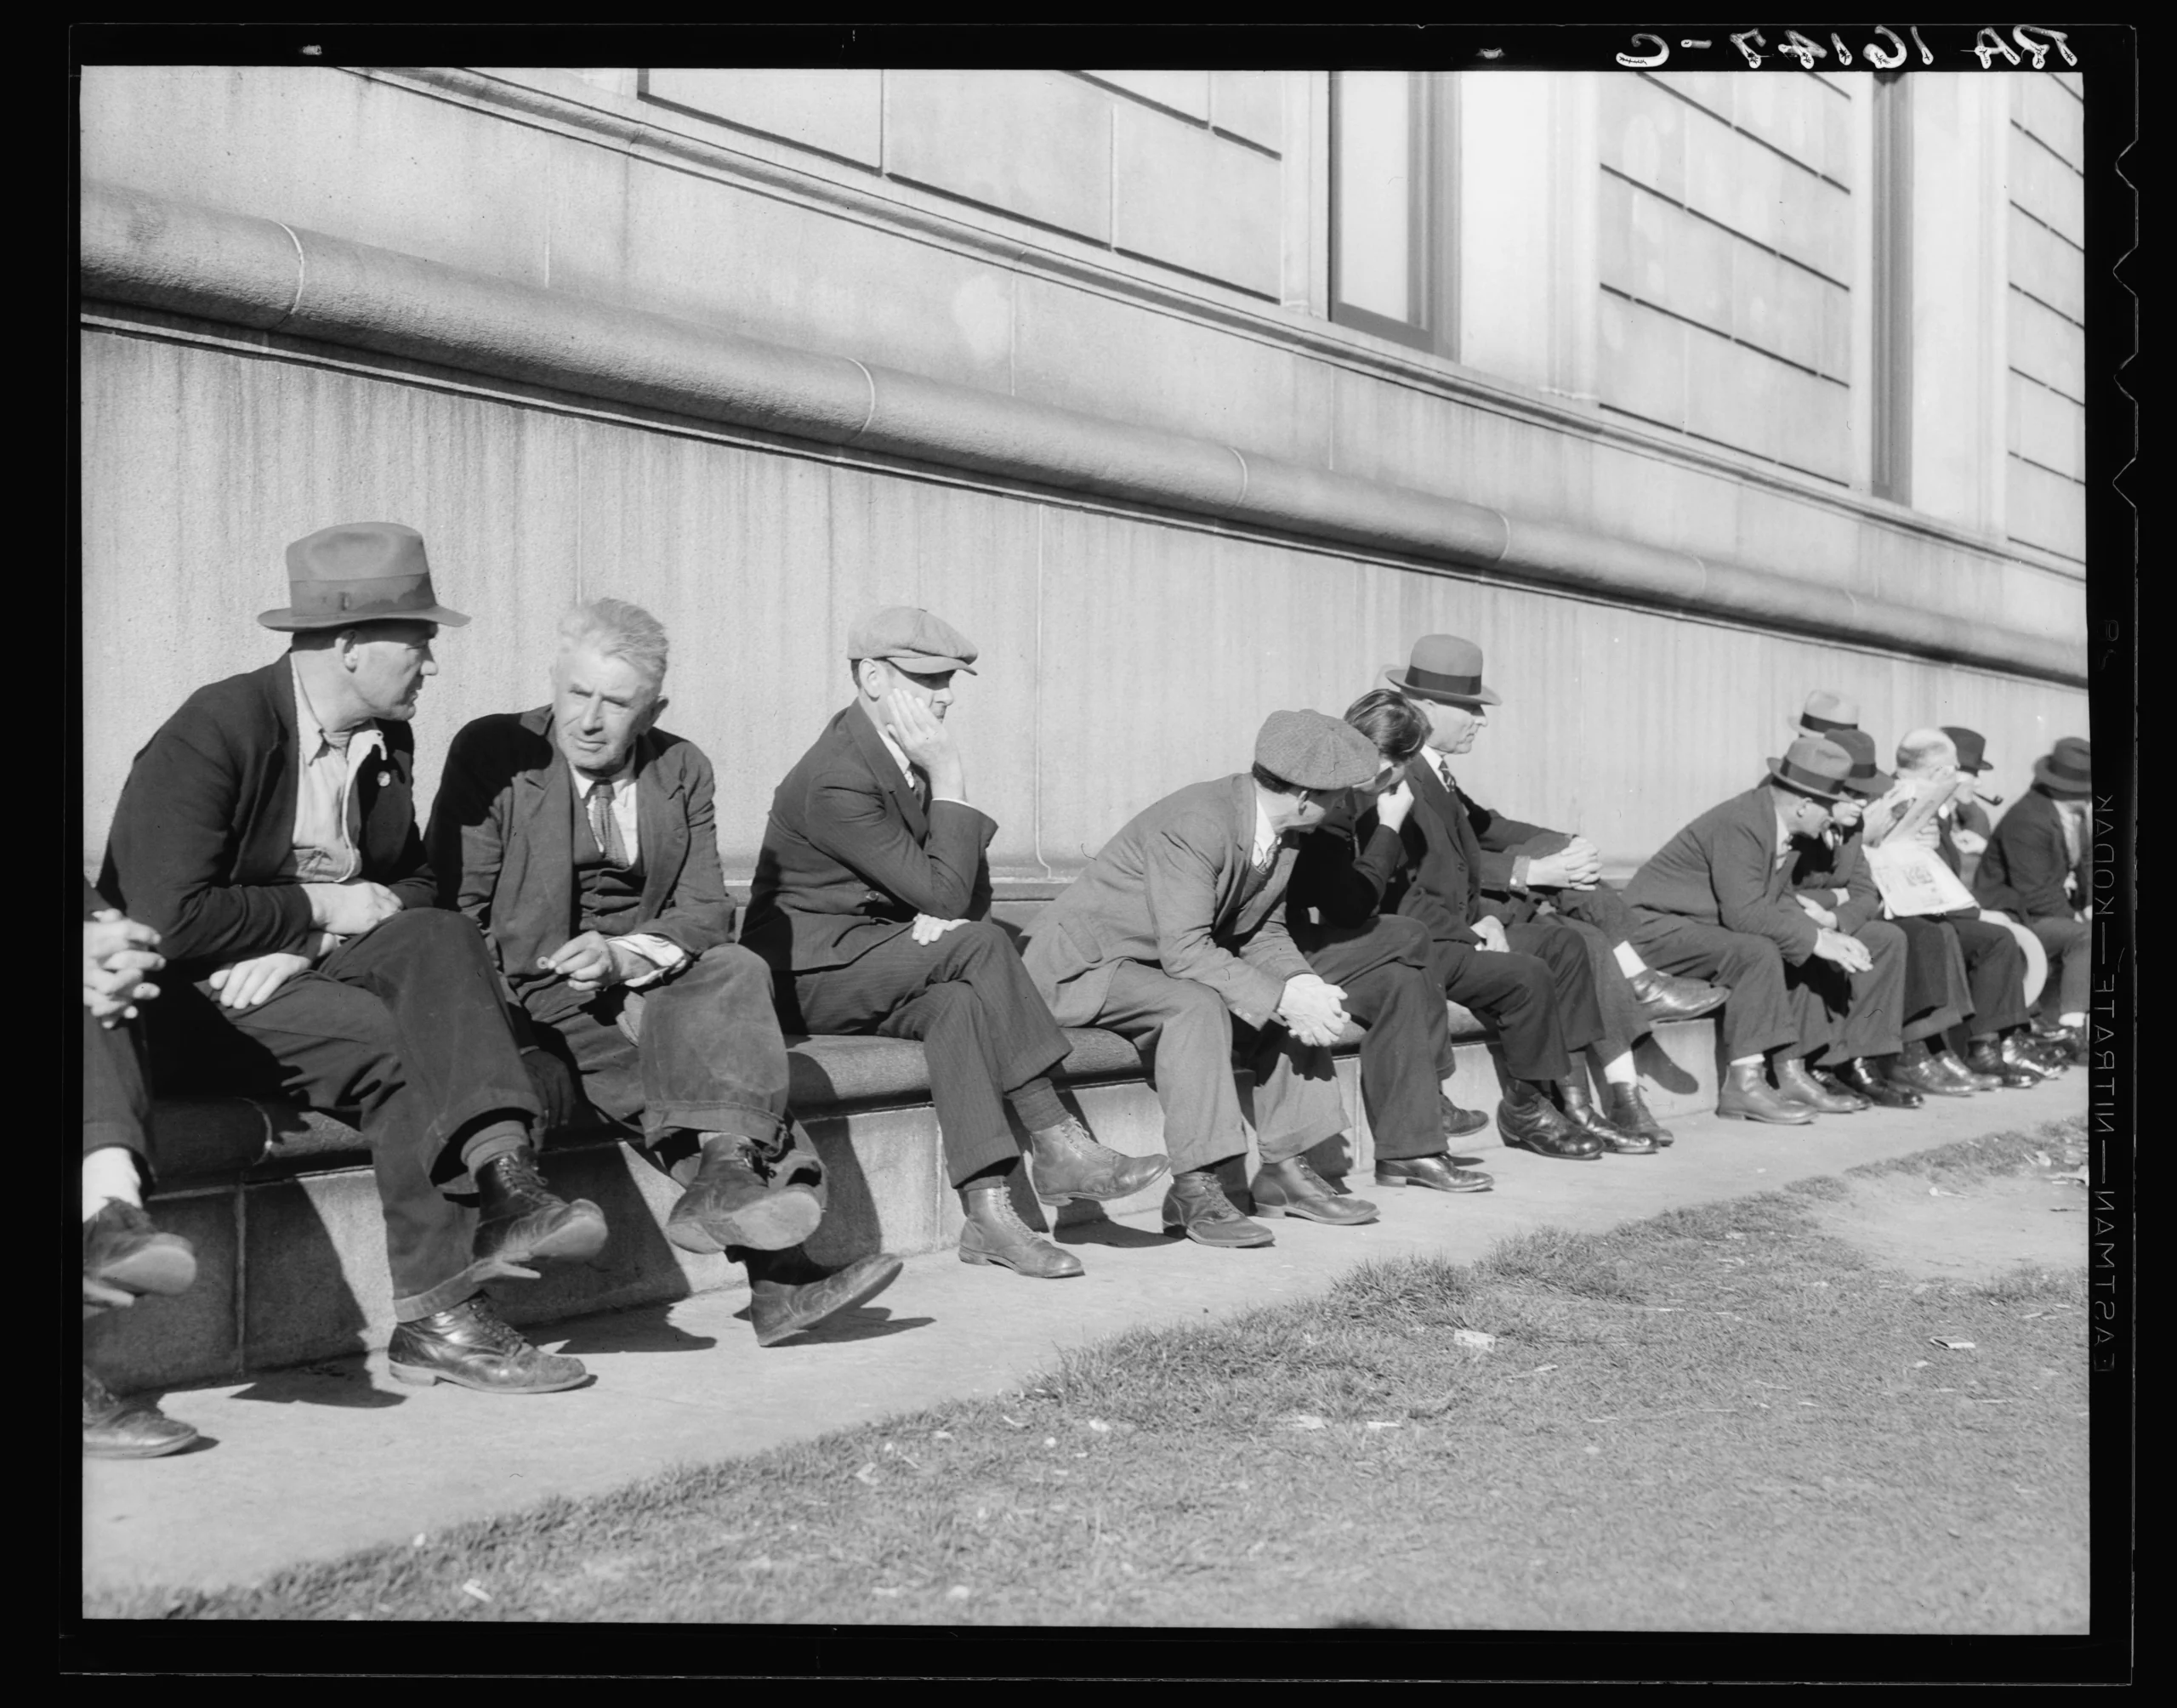 Photograph of unemployed men sitting on the sunny side of the San Francisco Public Library.